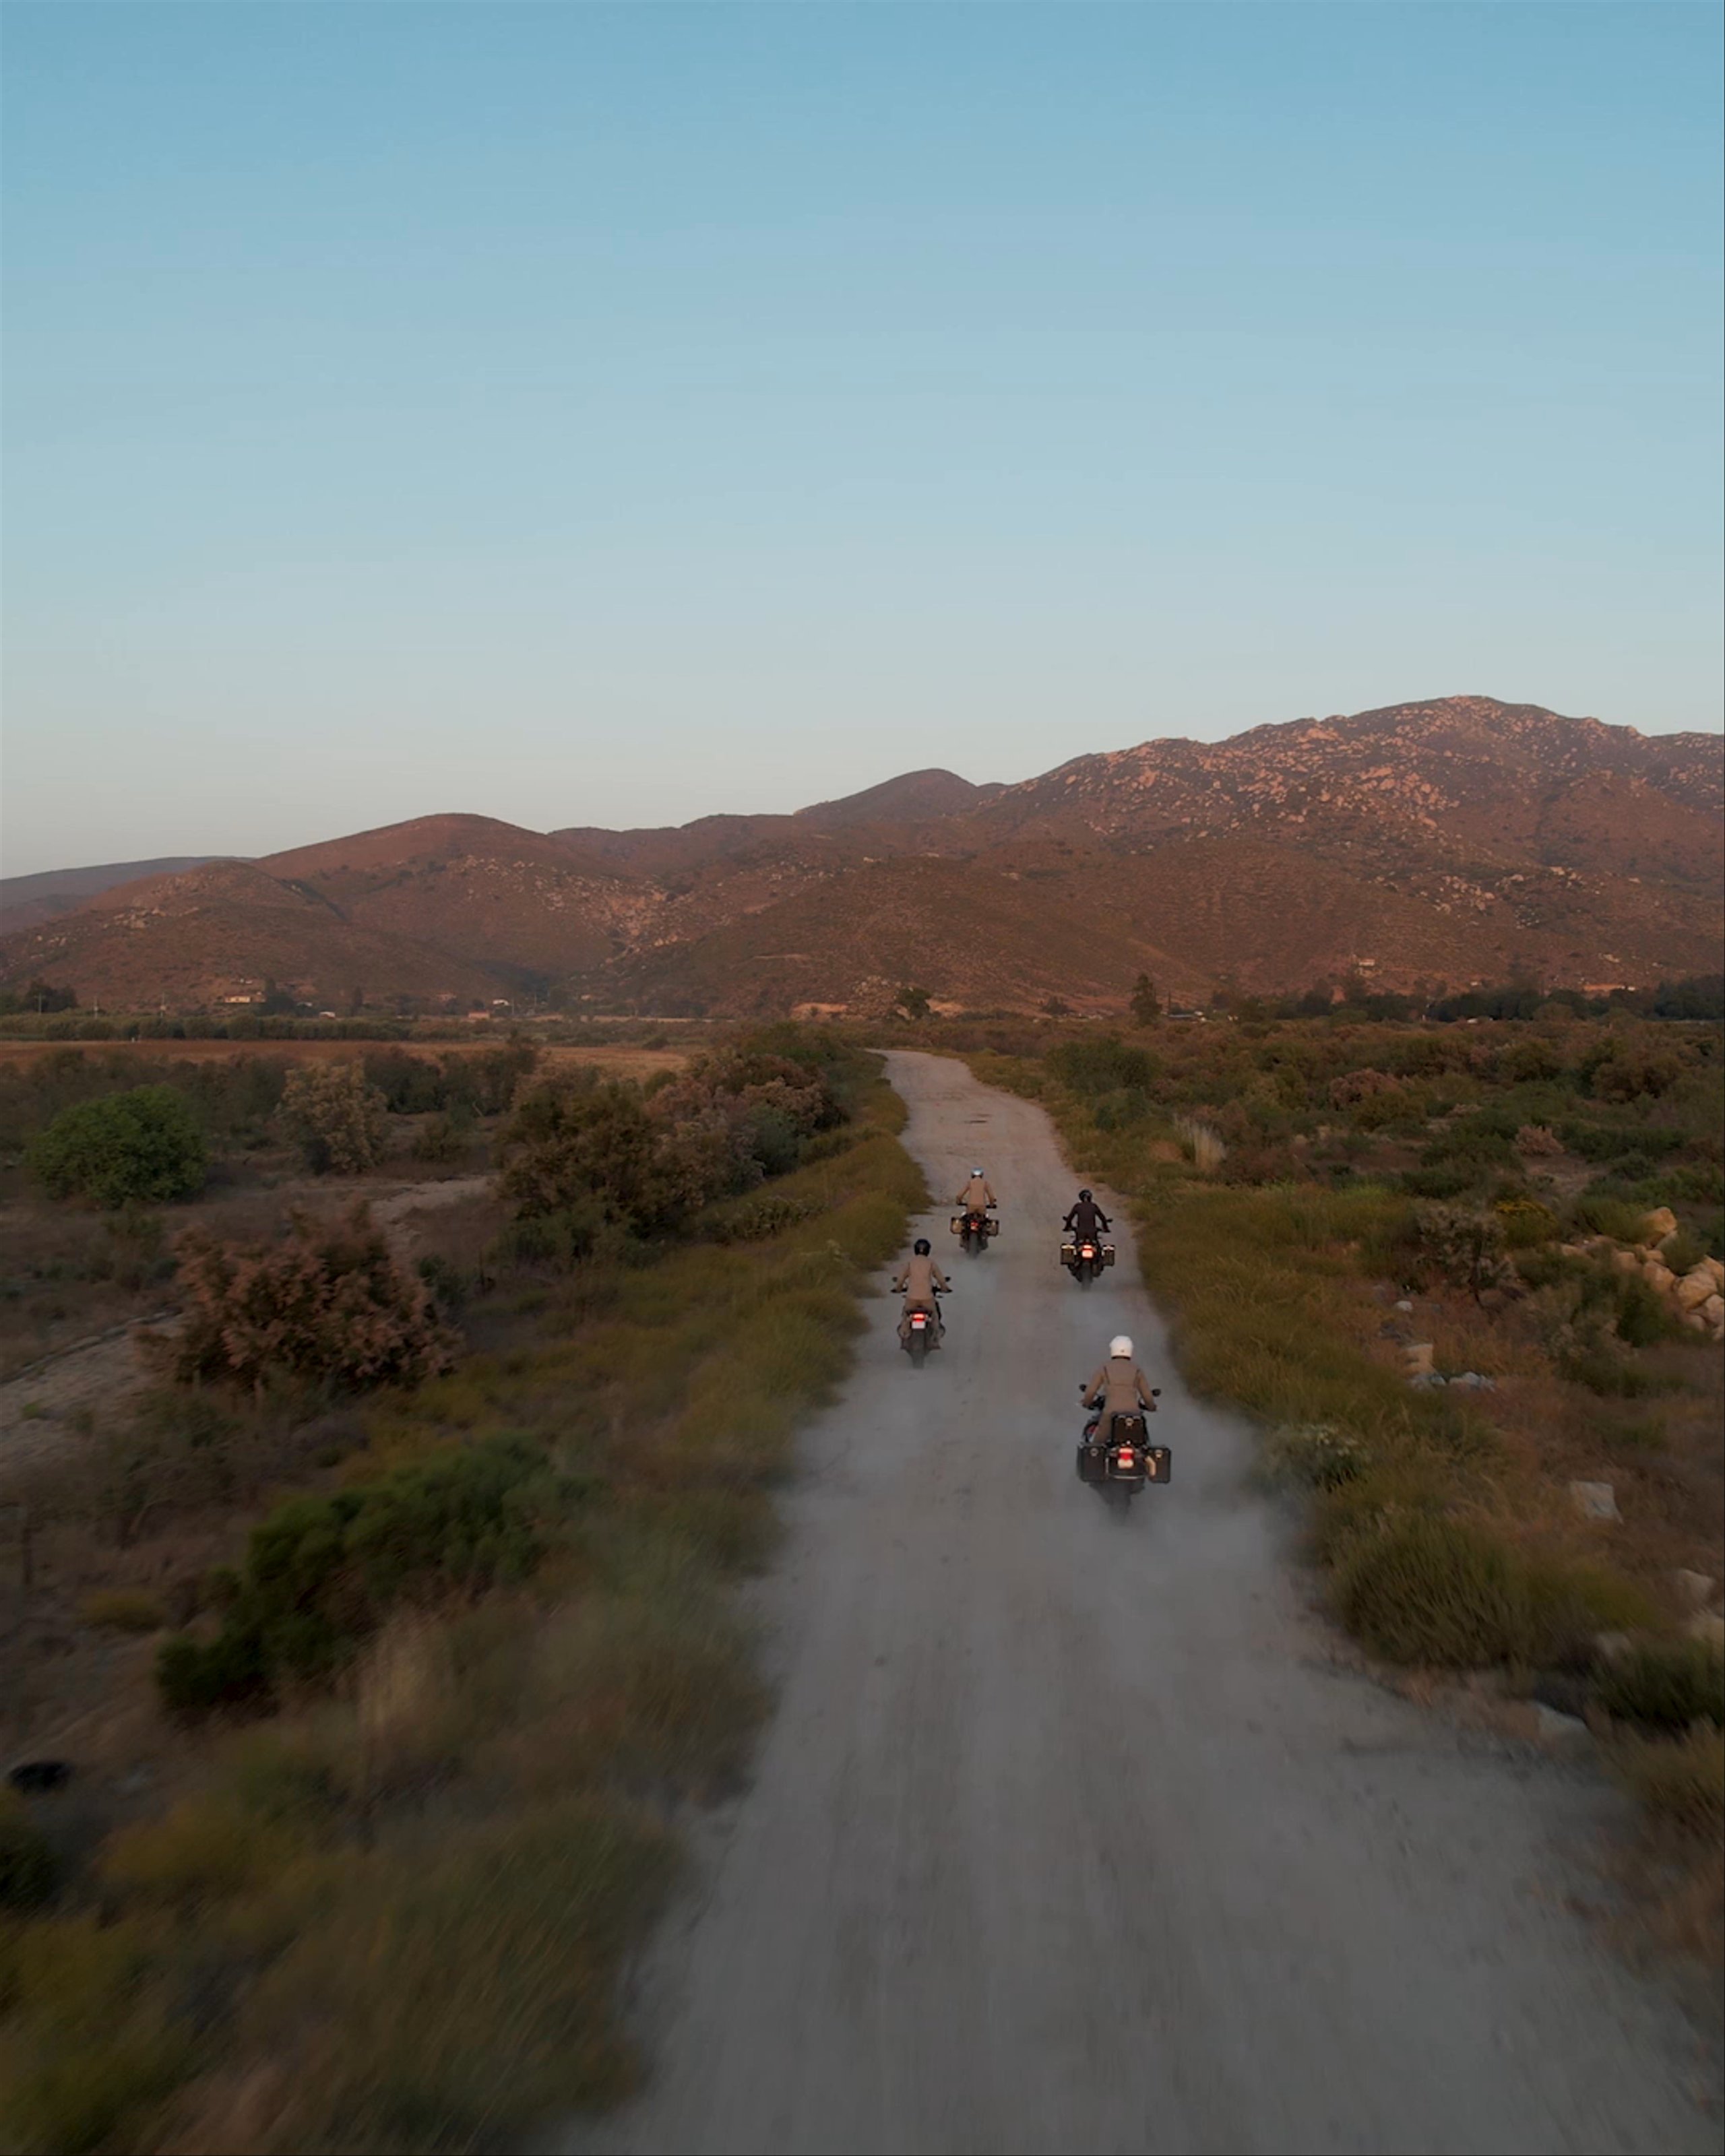 Group of motorcyclists riding down dirt path in Baja California